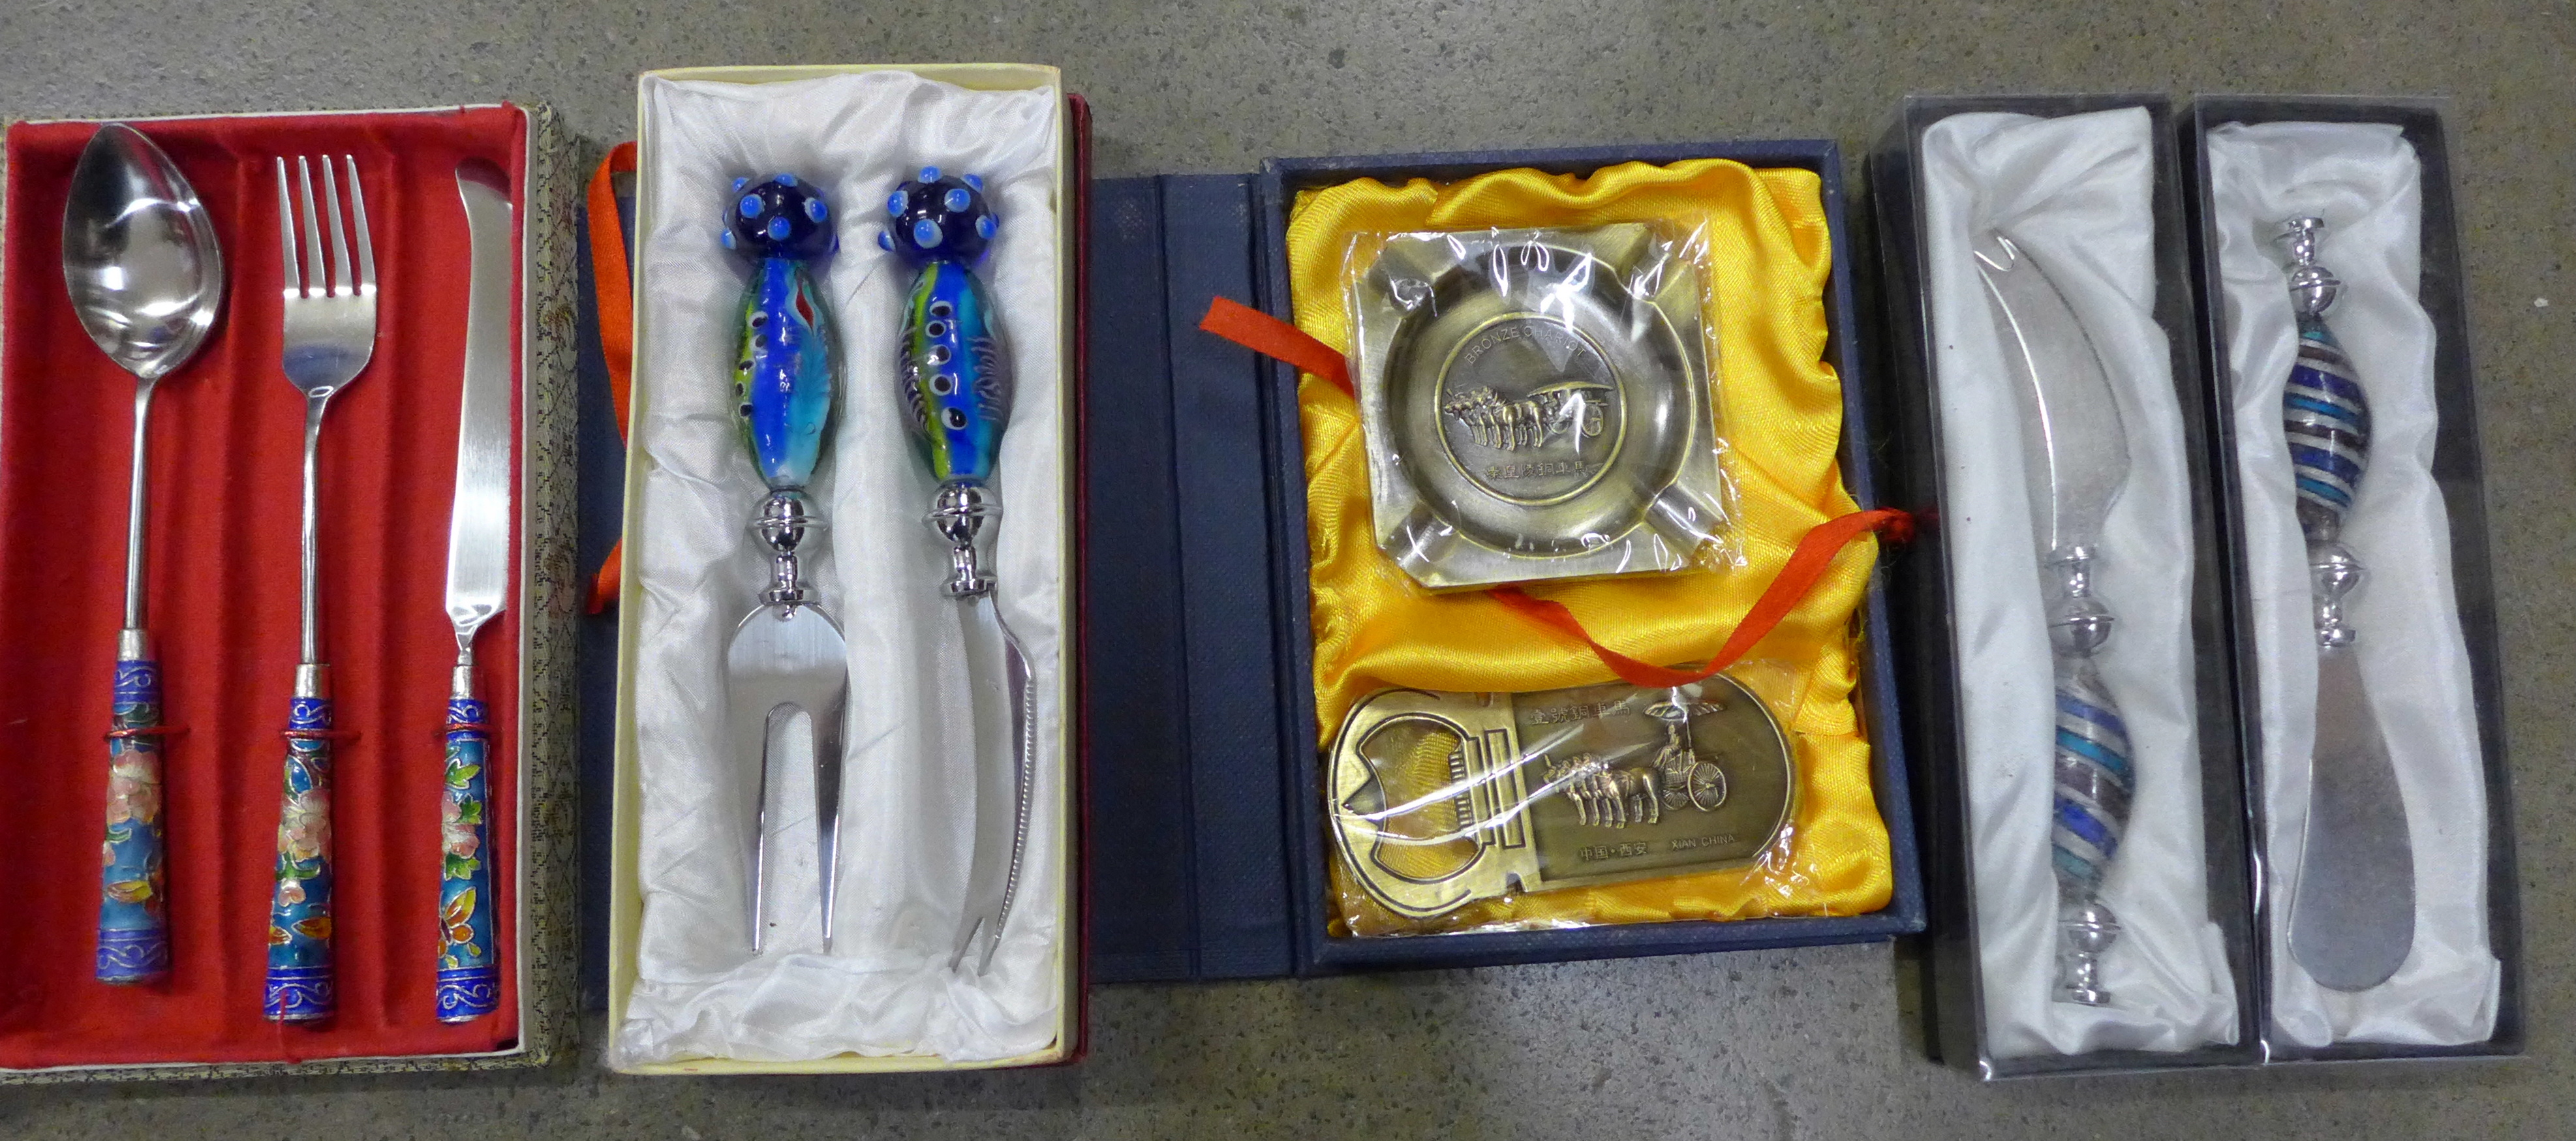 A glass handled cheese knife and butter knife, a similar set and ashtray and bottle opener ** - Image 2 of 2